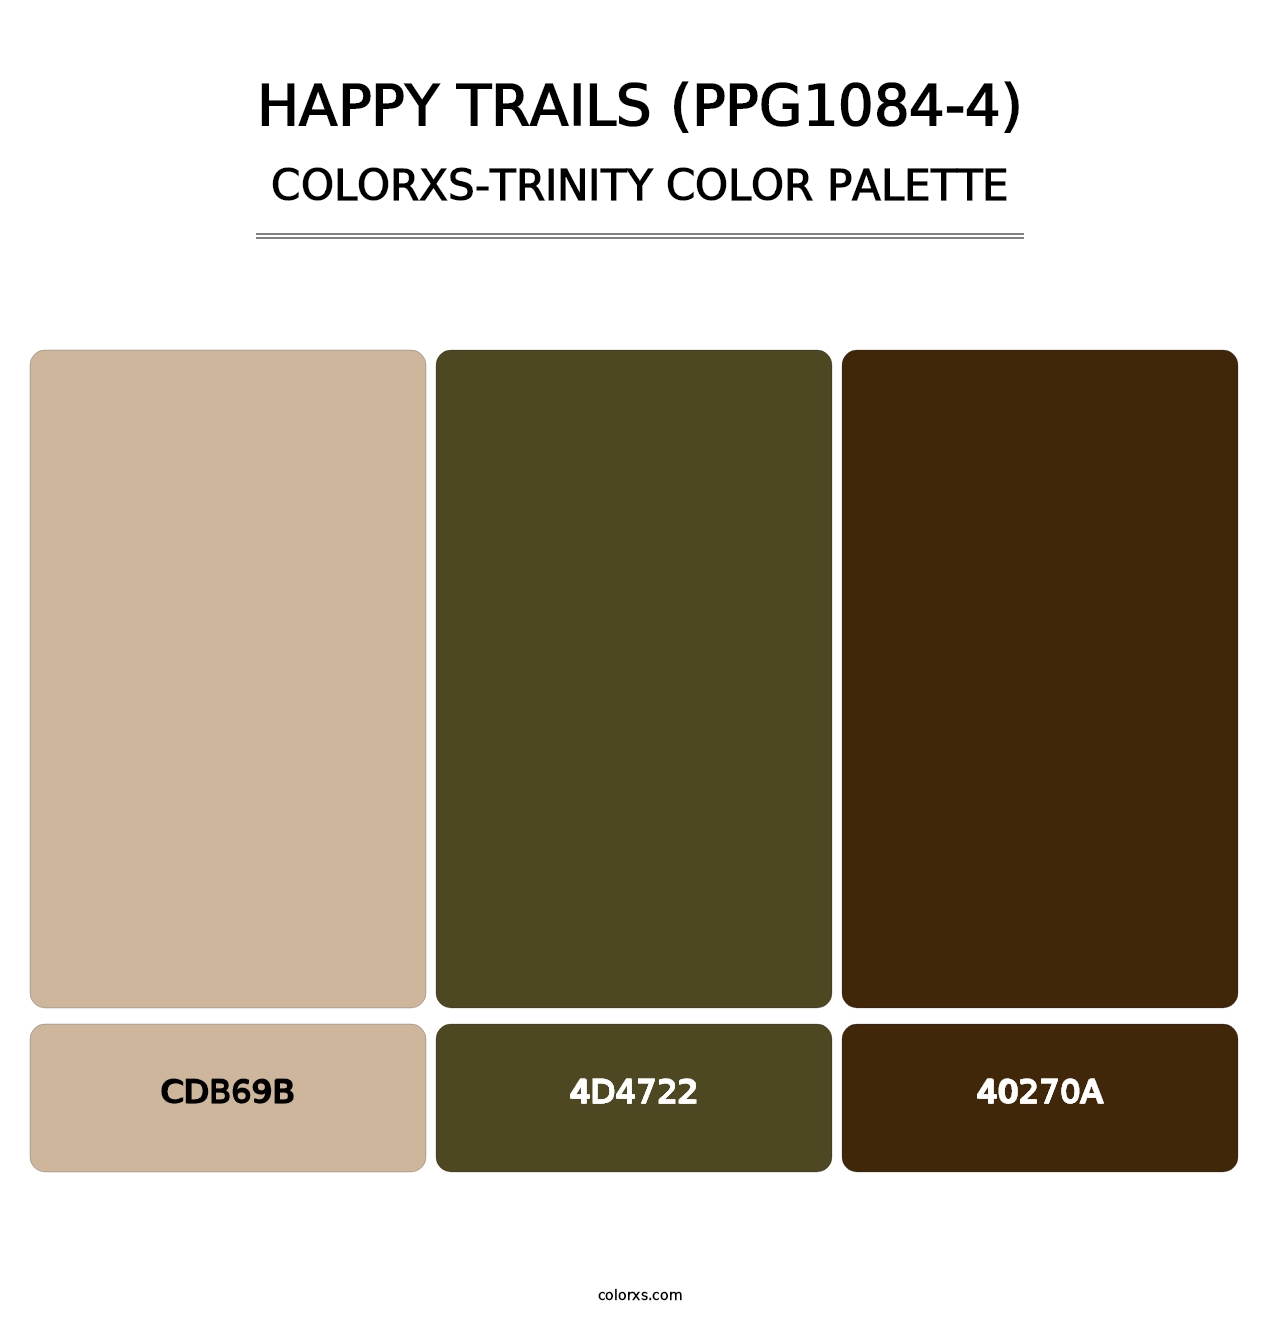 Happy Trails (PPG1084-4) - Colorxs Trinity Palette